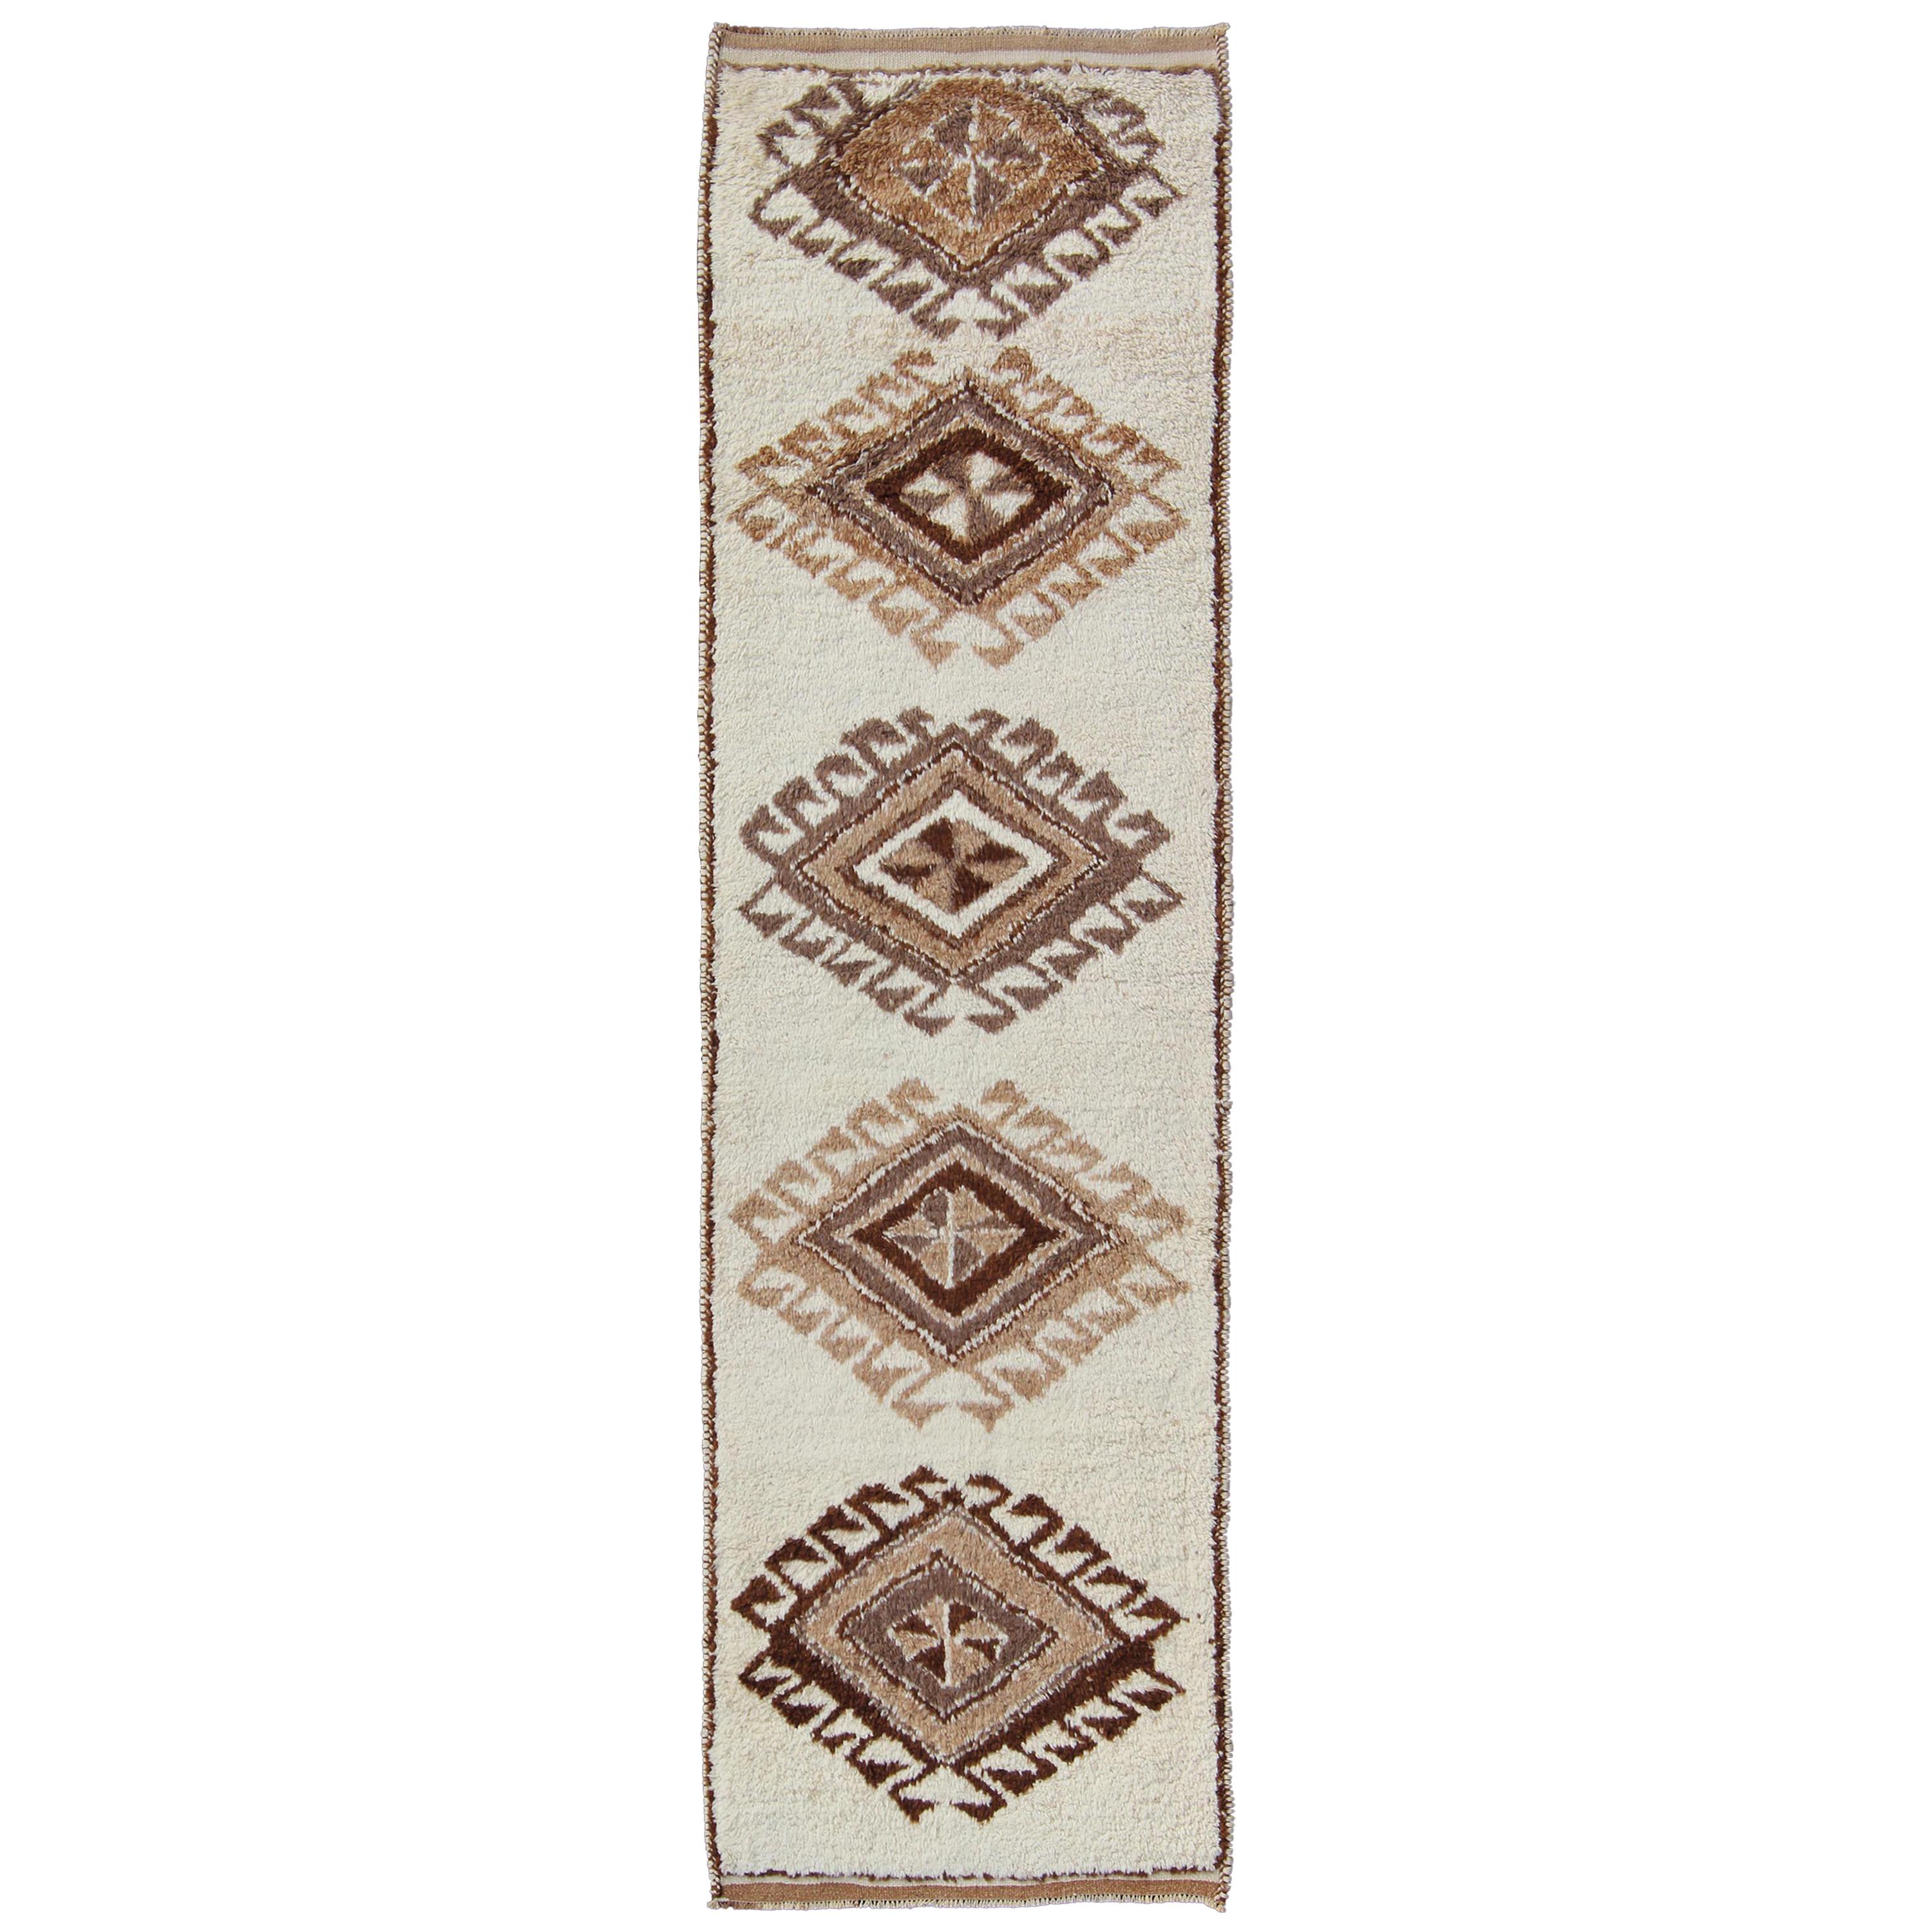 Vintage Turkish Tulu Gallery Rug with Tribal Diamond Design in Cream and Brown